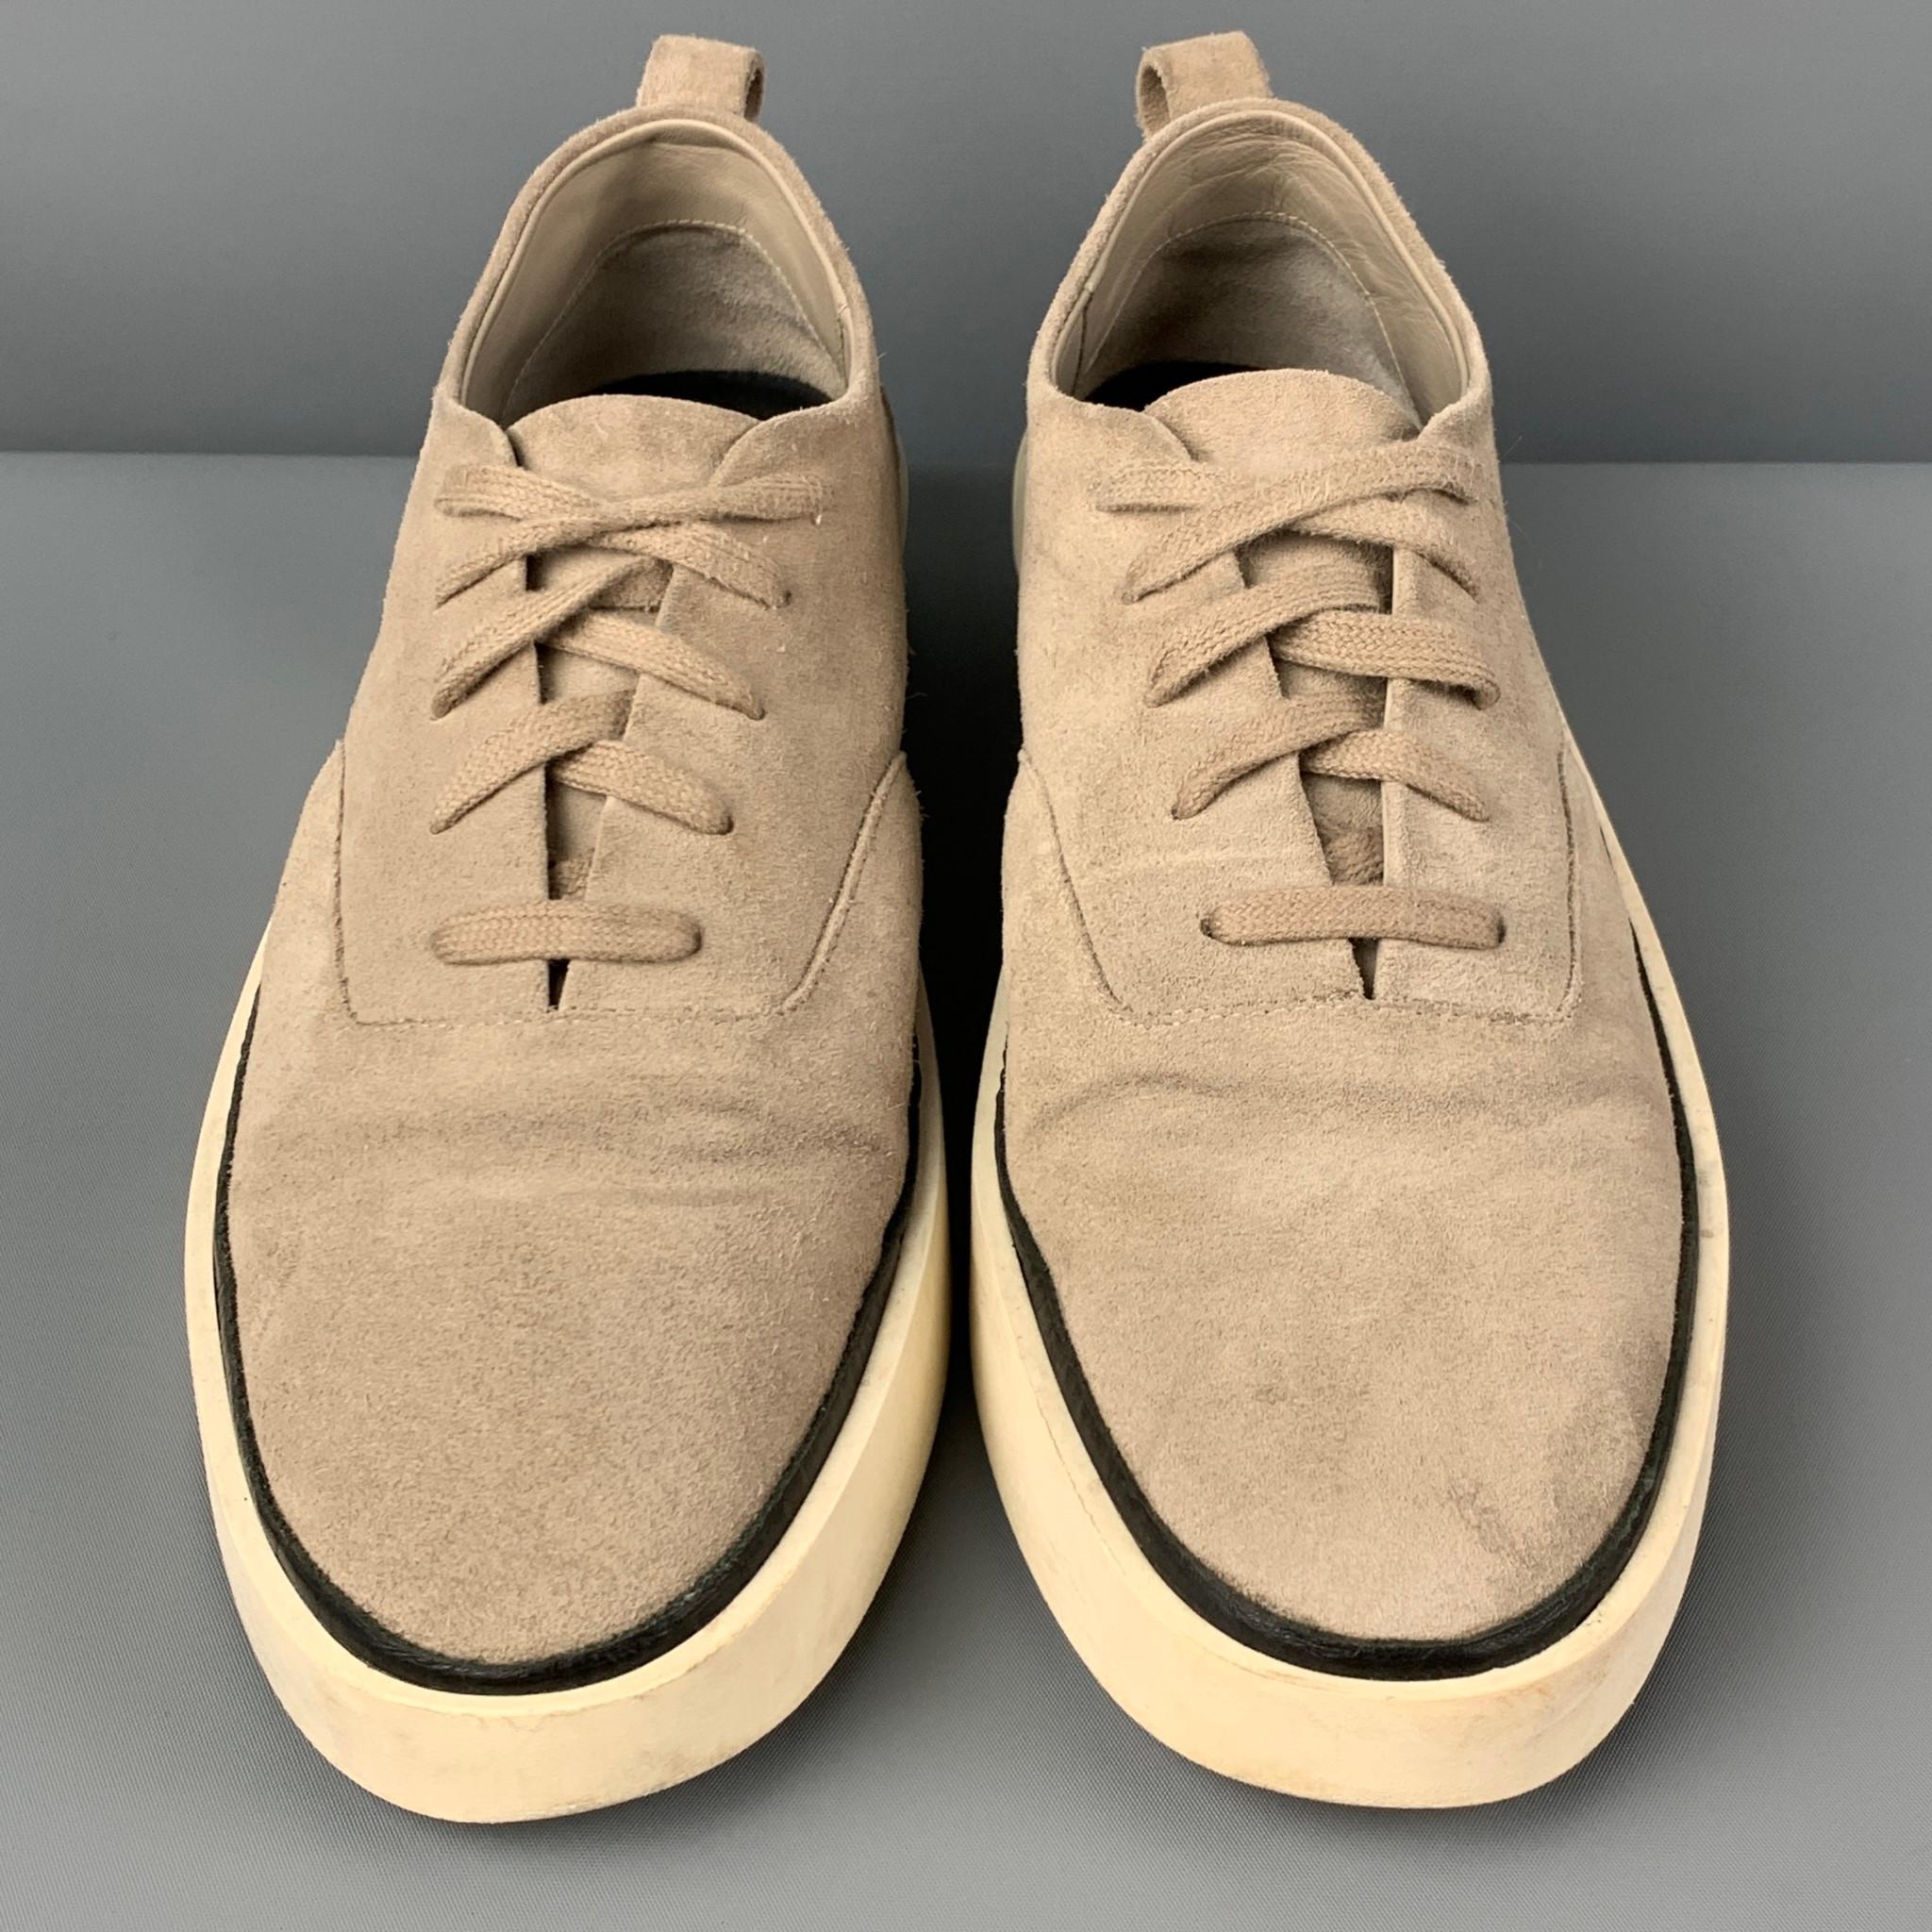 fear of god lace up sneaker